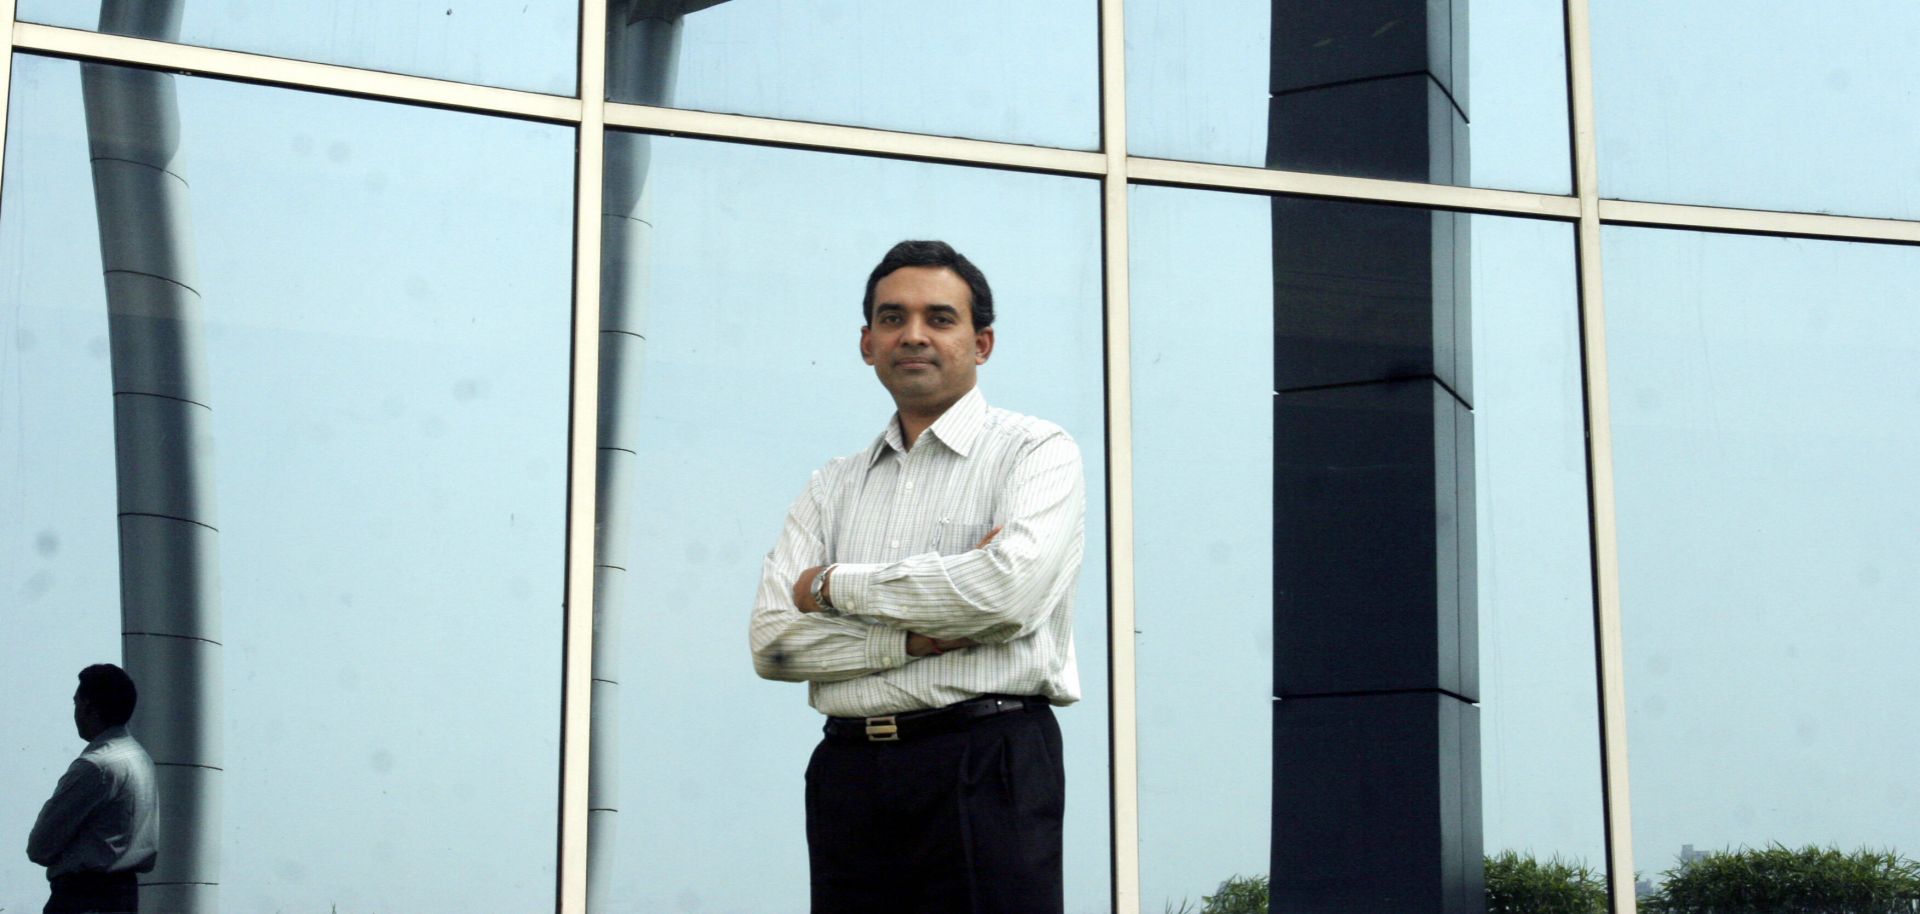 Shivkumar Mani, the head of marketing for the Dewan Housing Finance Corp., an Indian shadow bank, is seen in this photo.